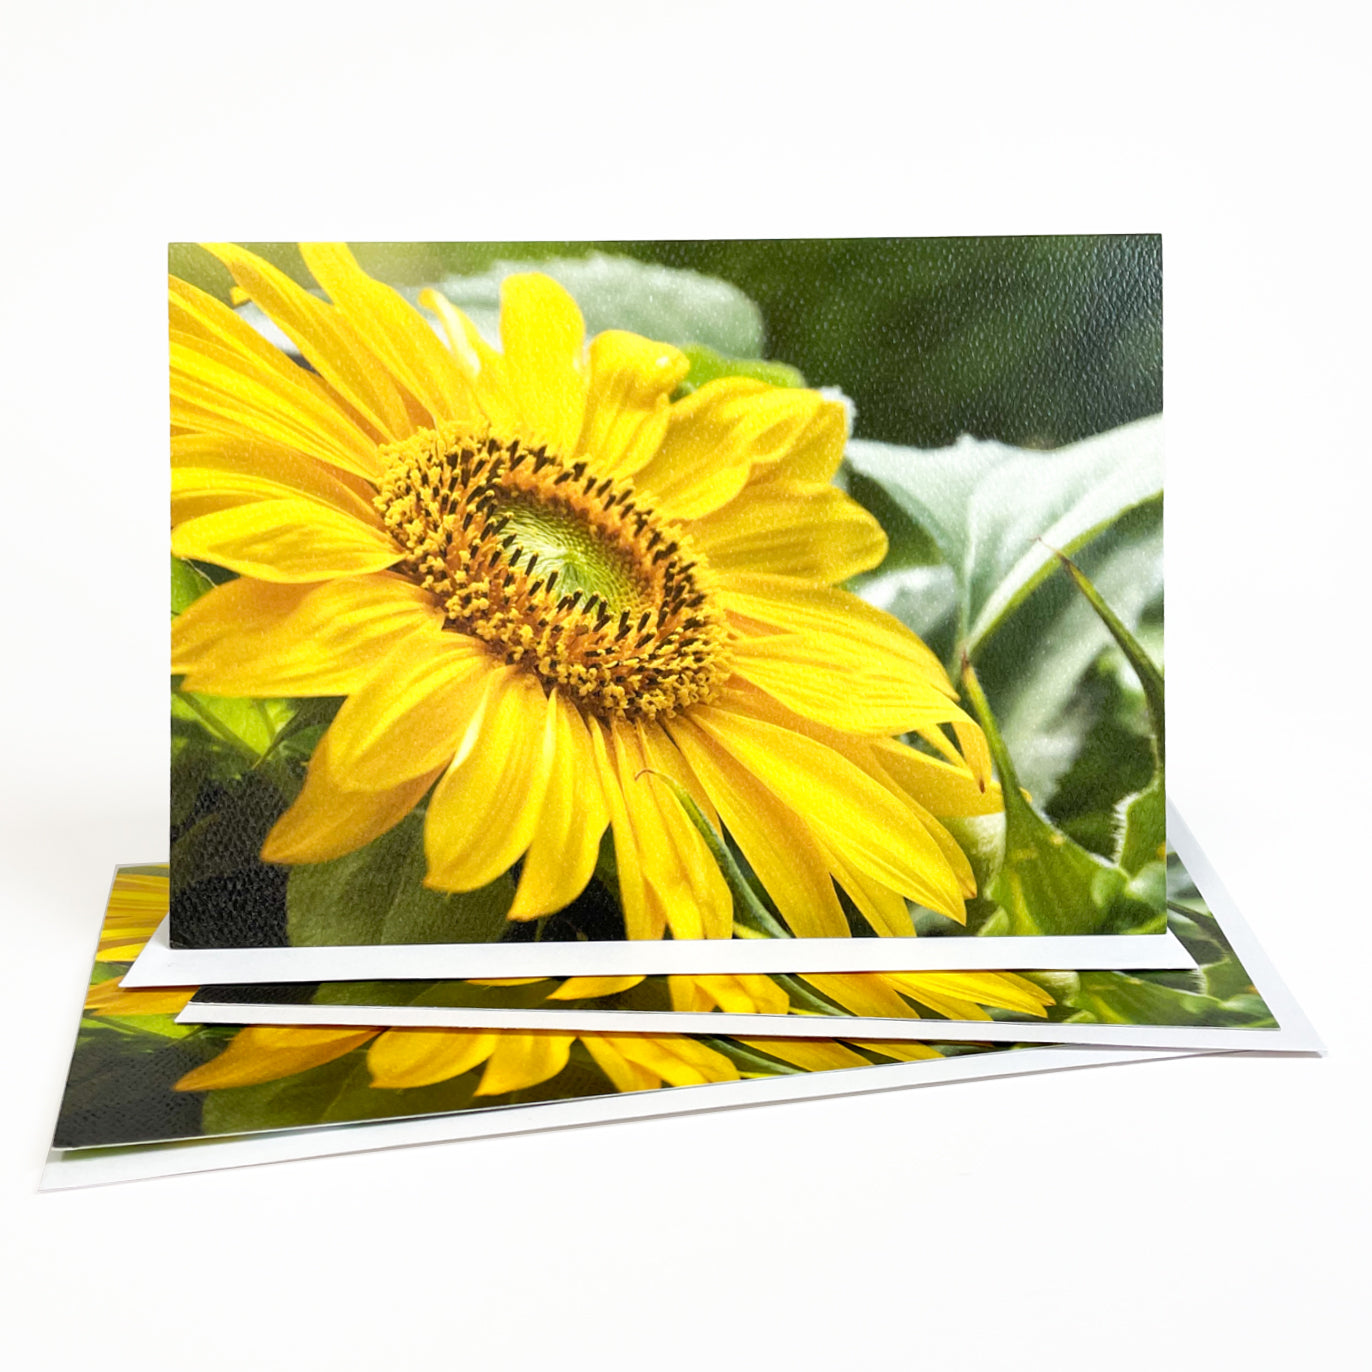 Blank greeting card featuring a photograph of a sunflower blooming on Mackinac Island by local artist Jennifer Wohletz of Mackinac Memories. This closeup of a sunflower in full bloom on Mackinac Island depicts the vibrant beauty of this summertime treasure.  Open the casually elegant card to discover an image of another one in full bloom.  Sunflowers are a symbol of loyalty and longevity.  Photography by Jennifer Wohletz.  The card is meant to be shared or displayed as a work of art.  